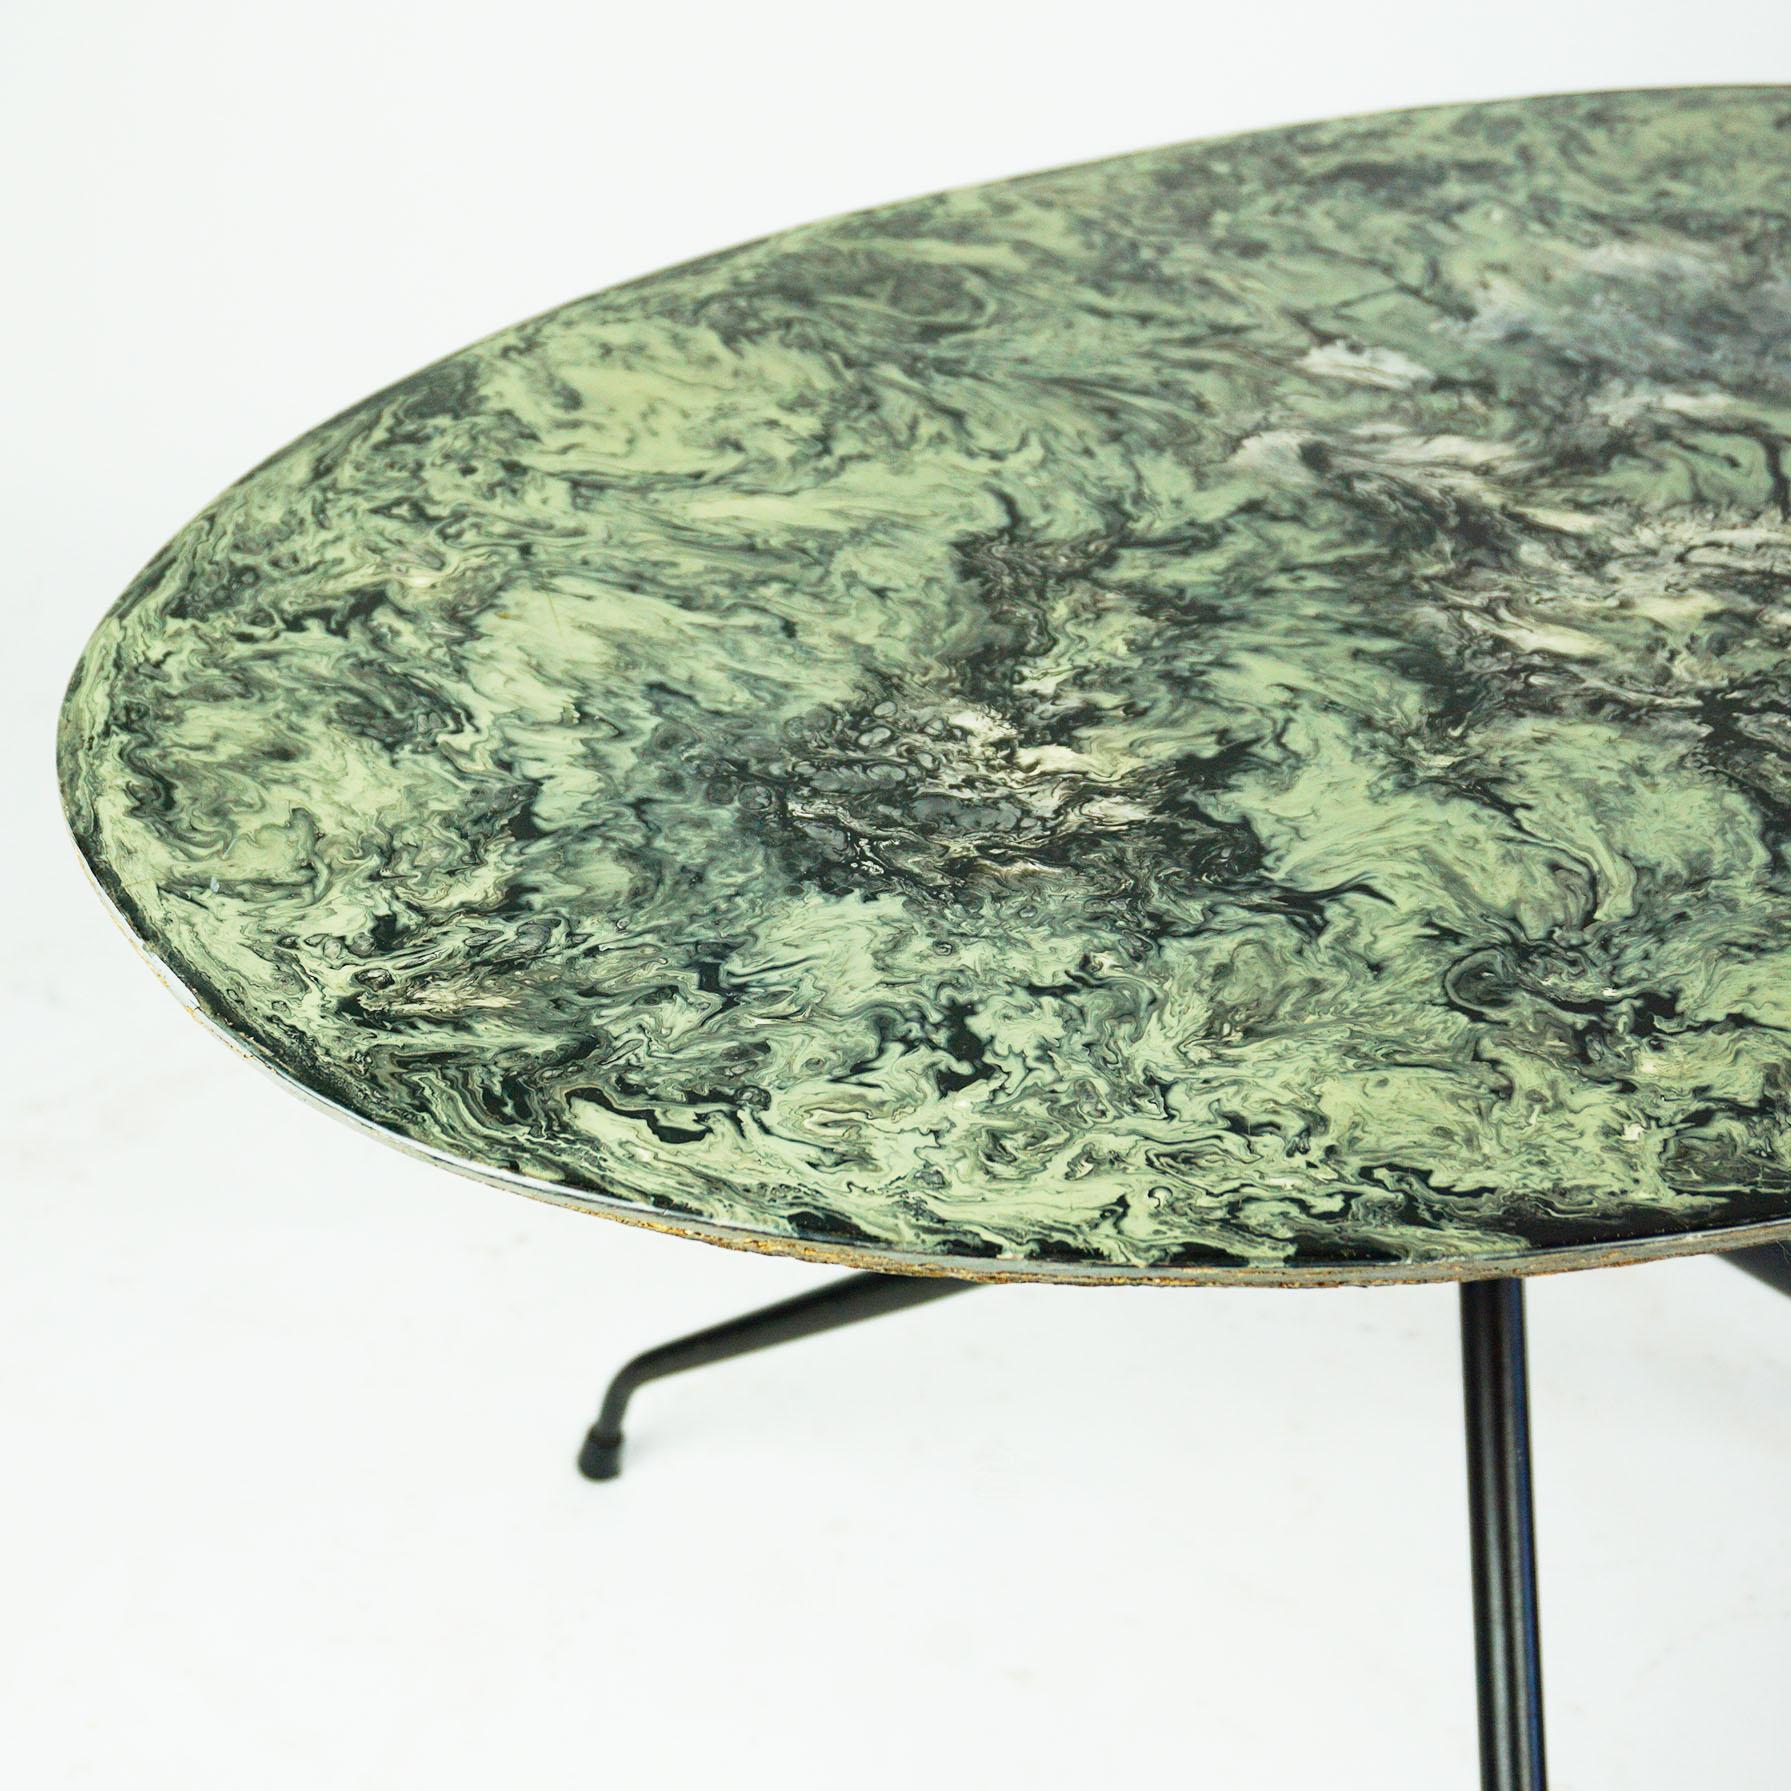 Italian Midcentury Oval Cocktail or Coffee Table with Faux Green Marble Top 1